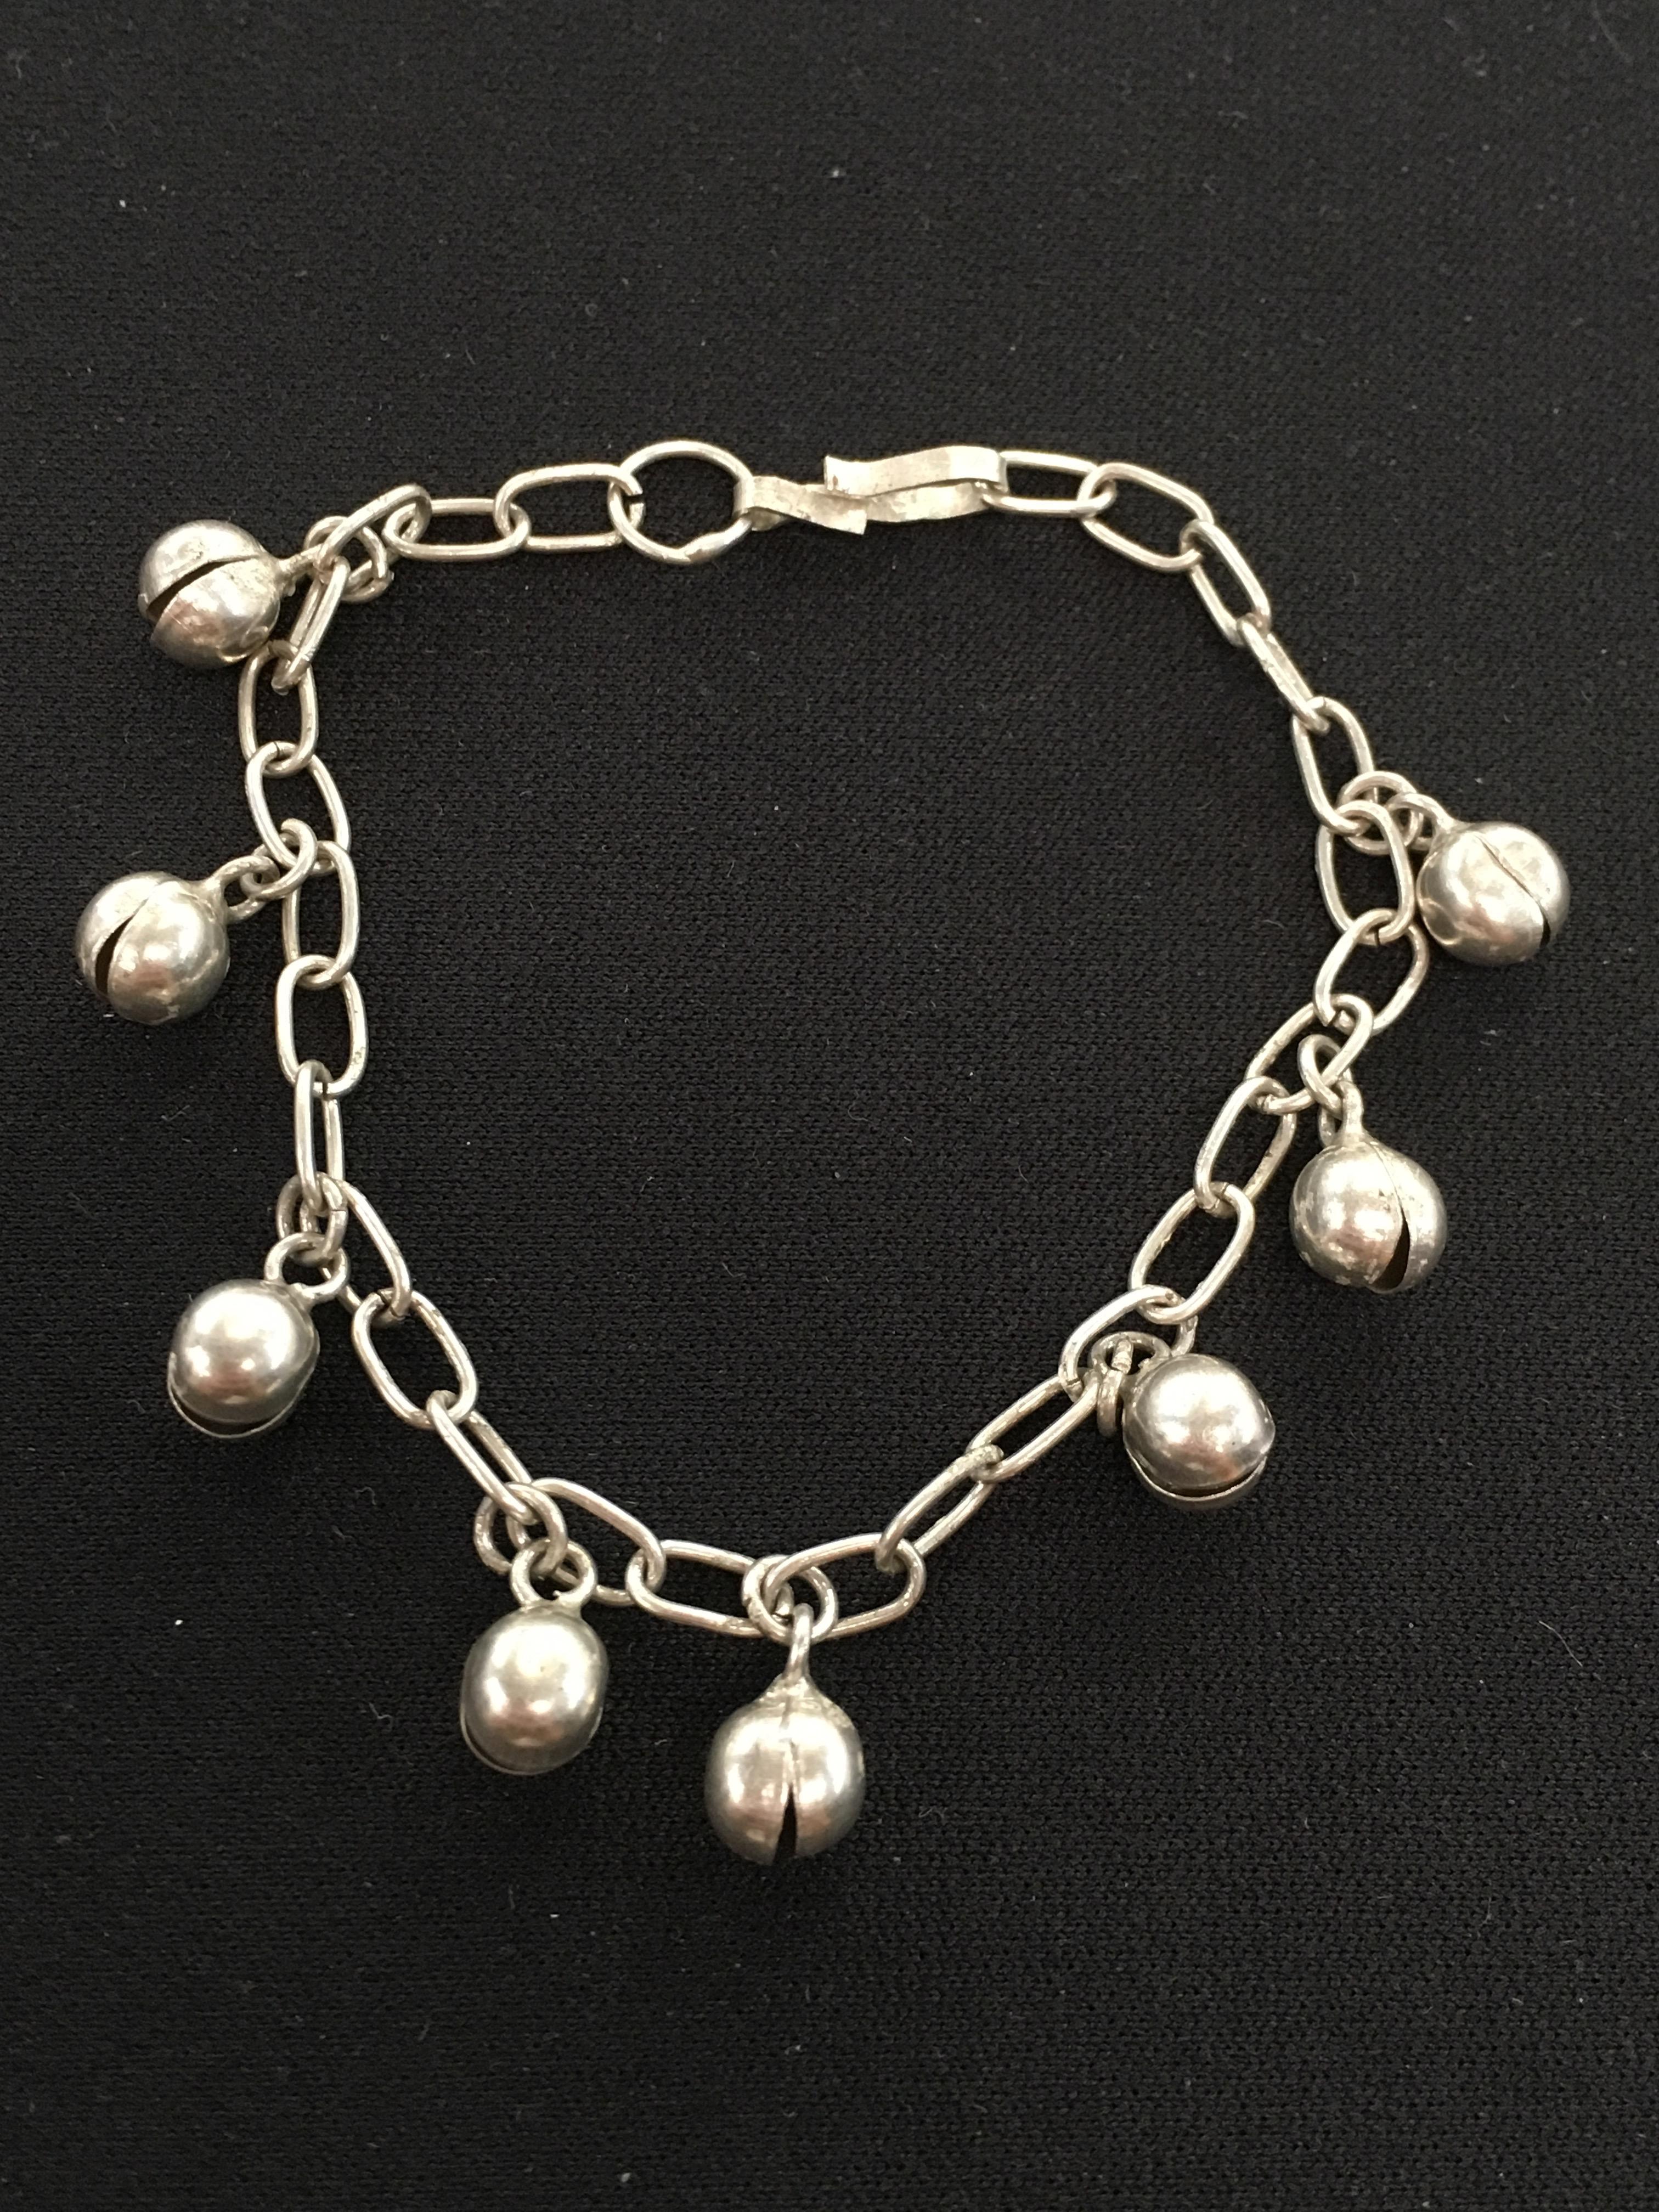 Sterling Silver 7" Cable Link Bracelet w/ Silver Bell Charms